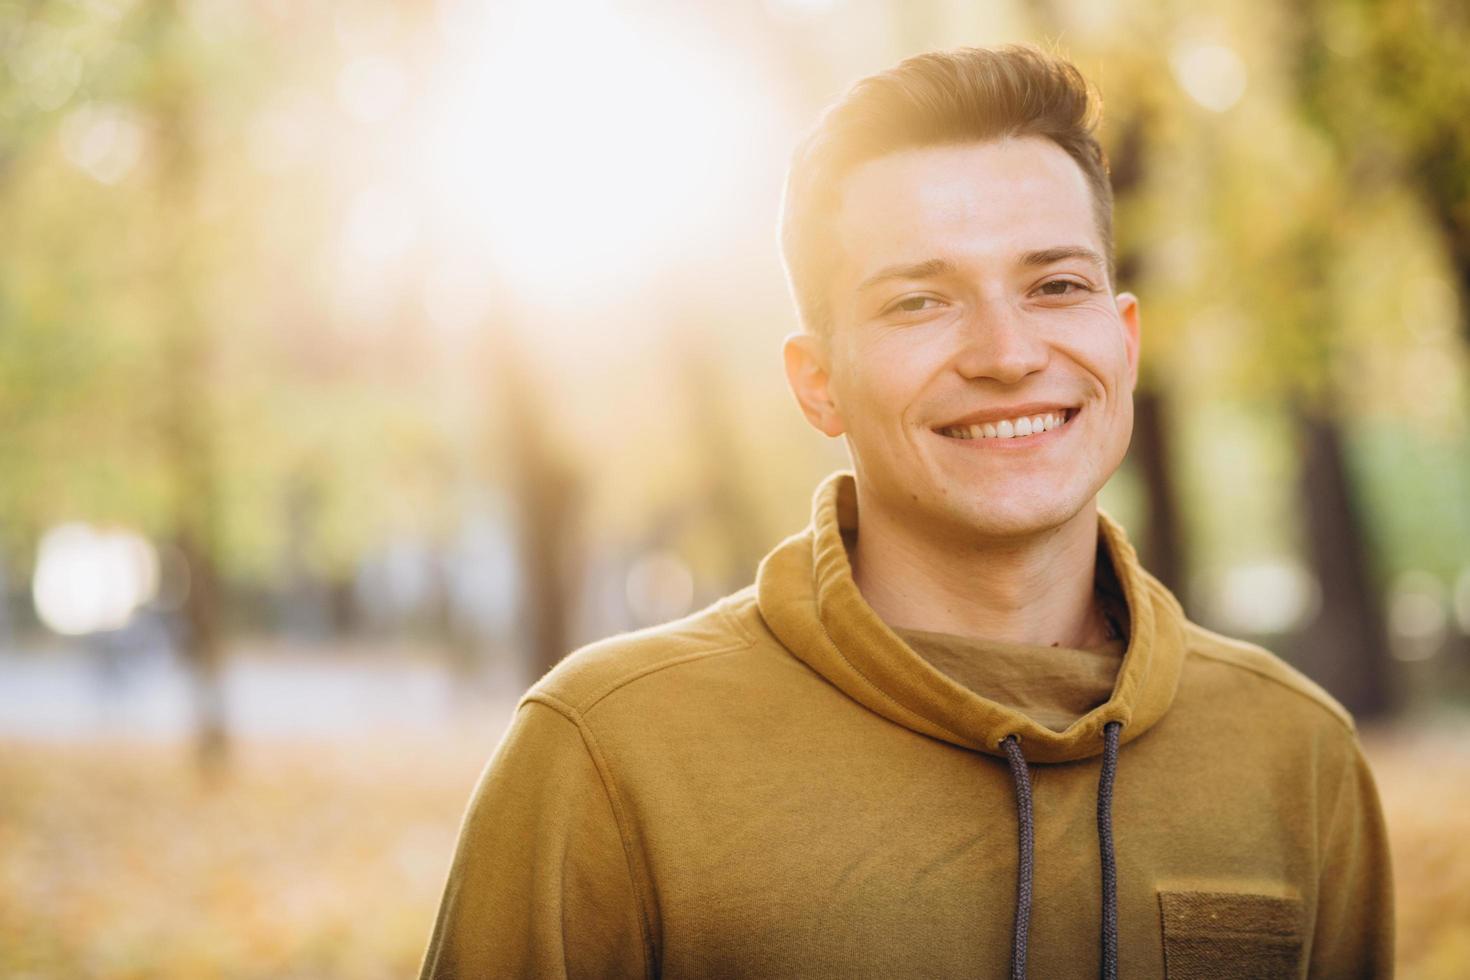 Portrait of handsome guy smiling in the autumn park photo